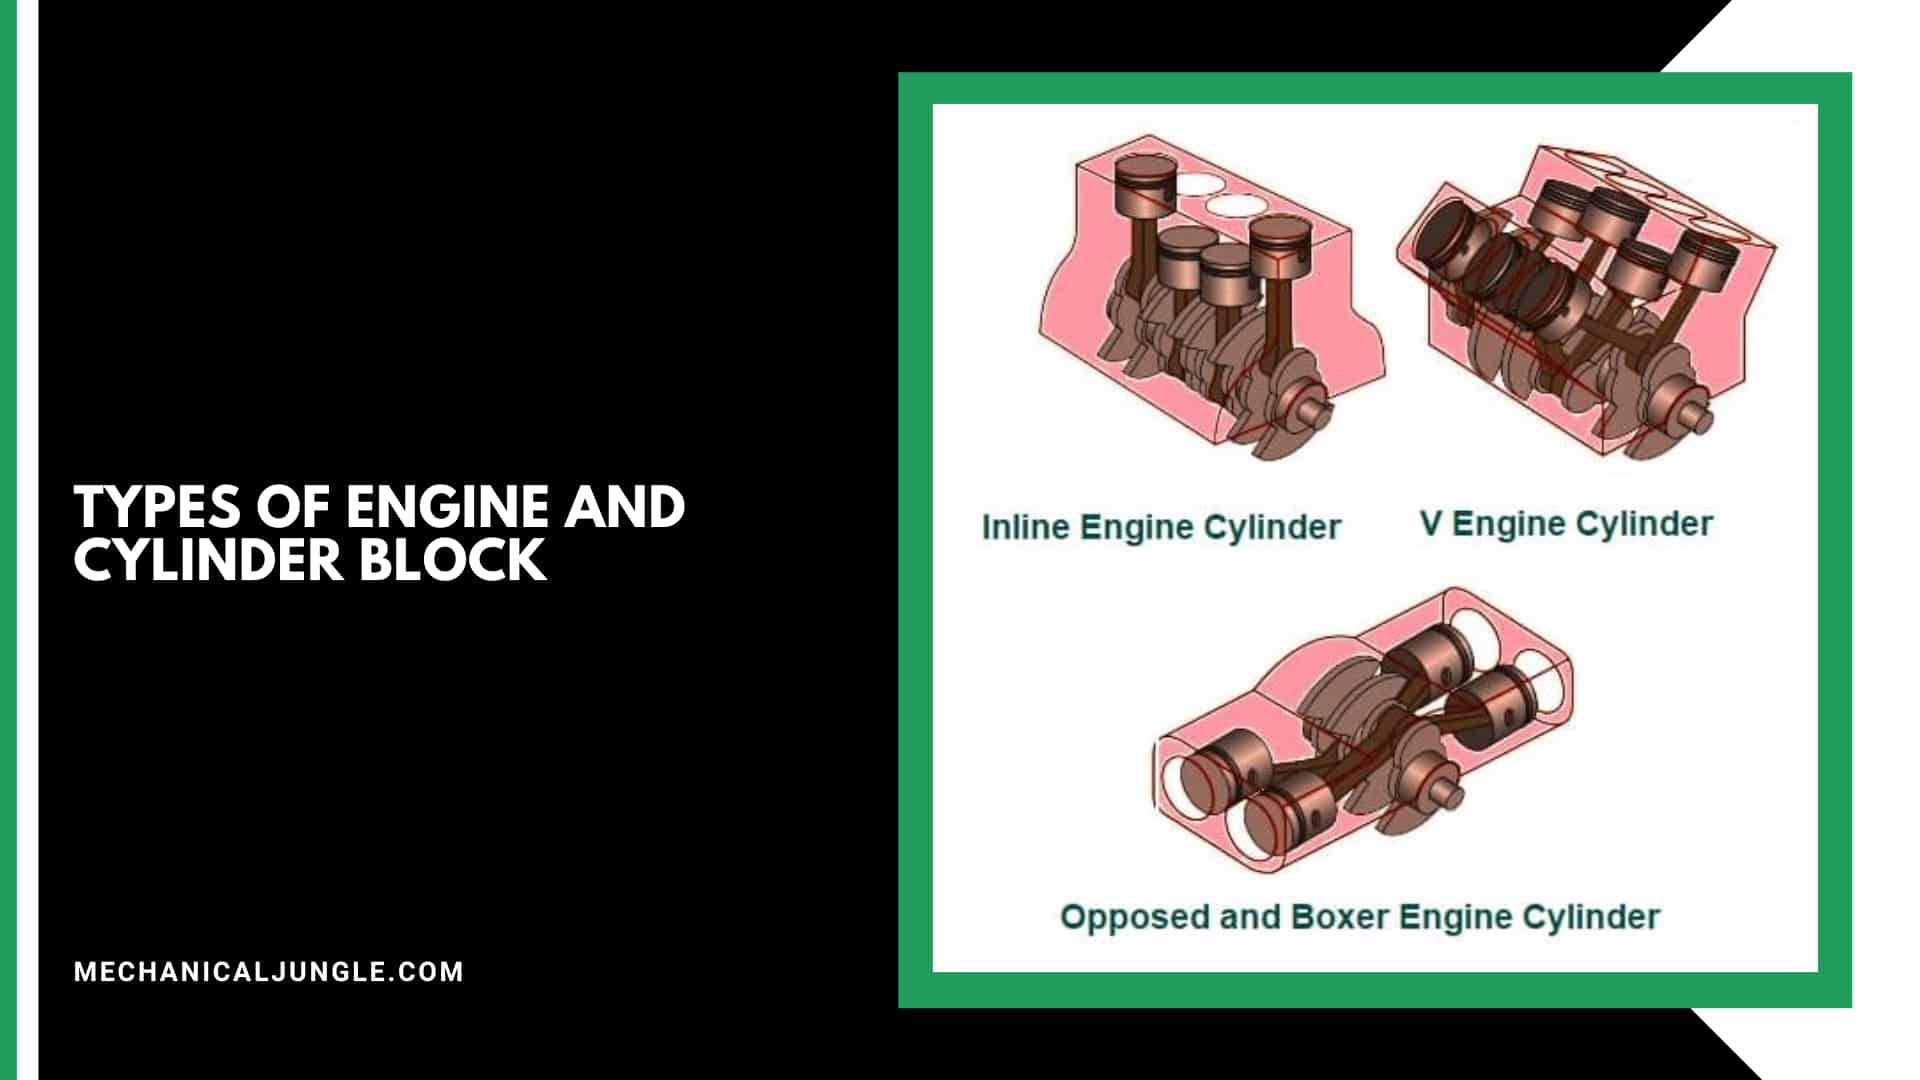 Types of Engine and Cylinder Block